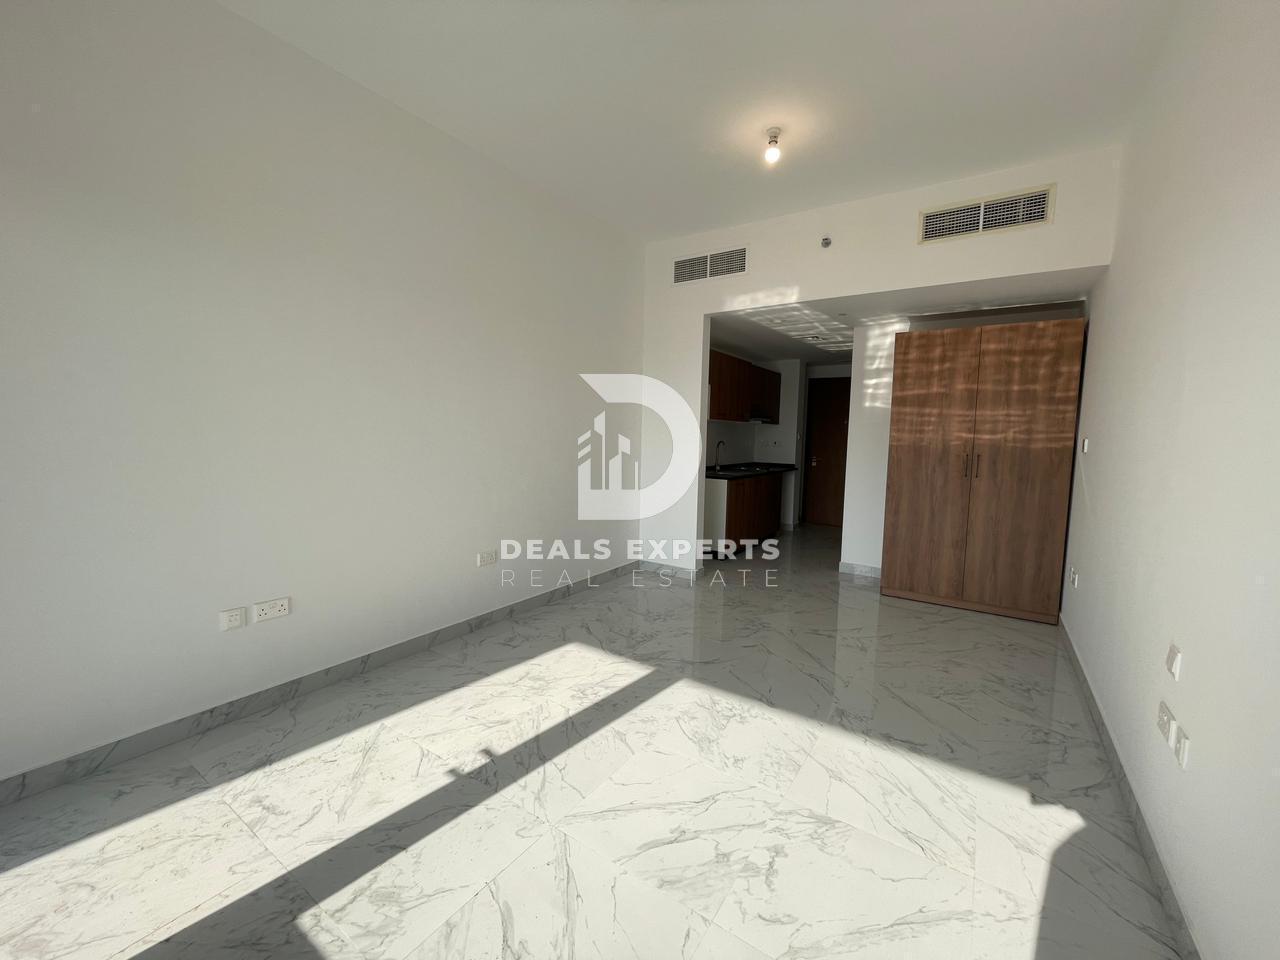 1 bath Apartment for rent in Oasis 1, Oasis Residences, Masdar City, Abu Dhabi for price AED 43000 yearly 